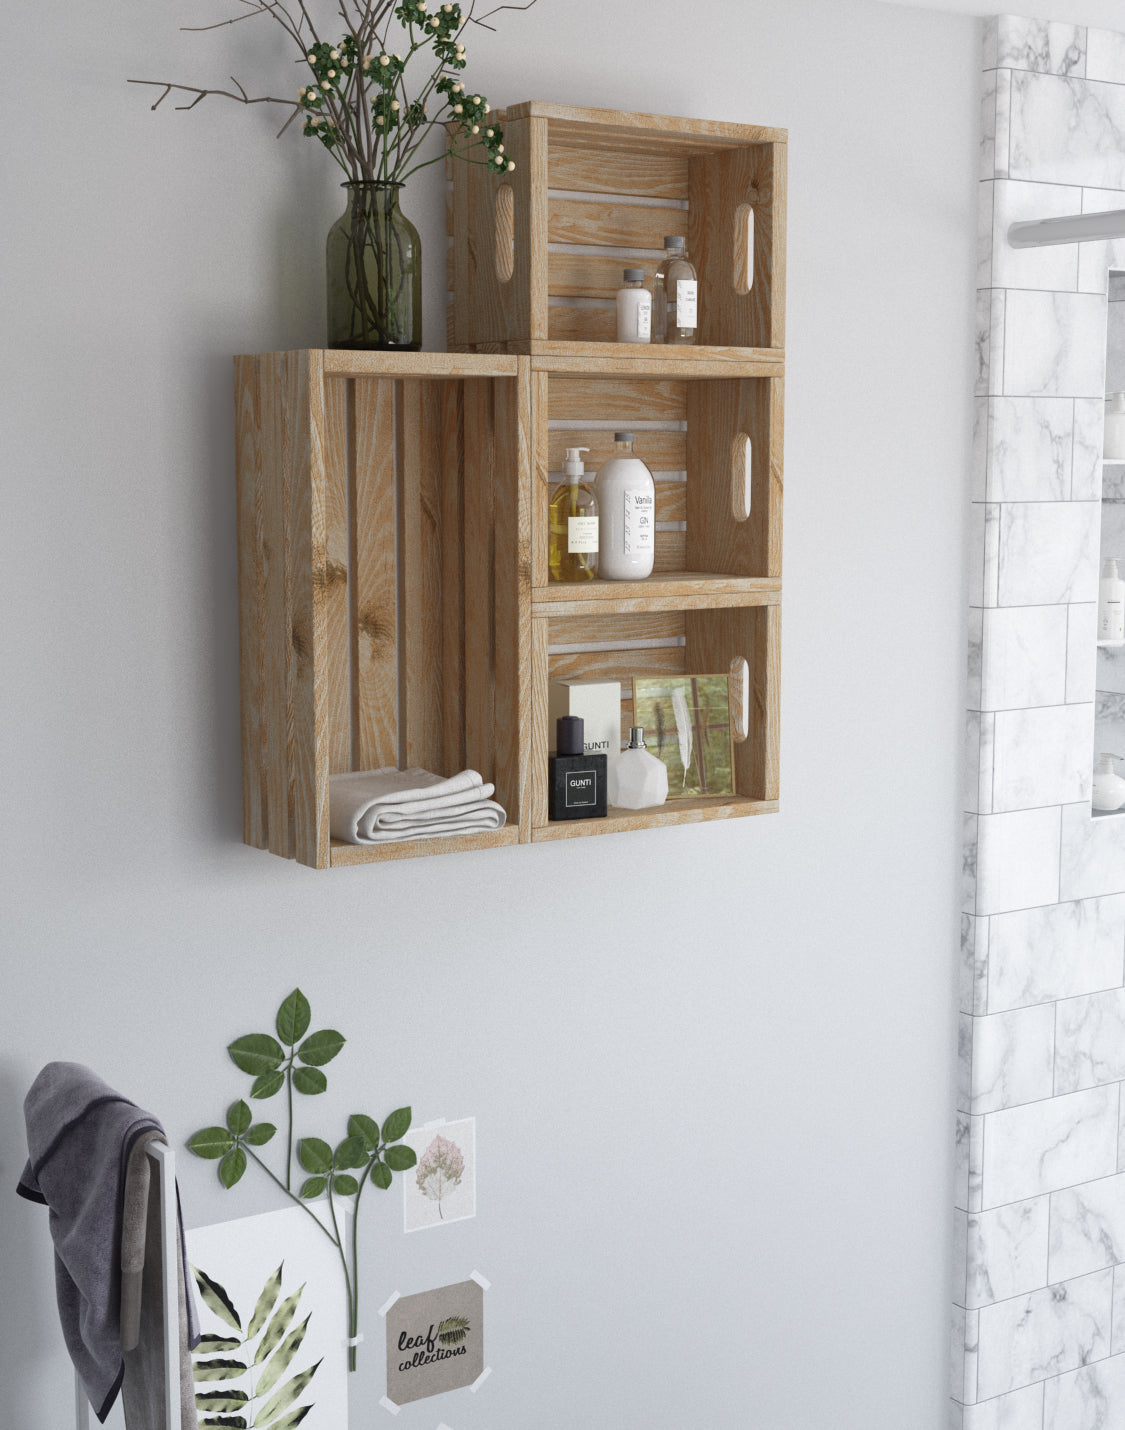 Lever Bathroom Unit Modular And real wood furniture product